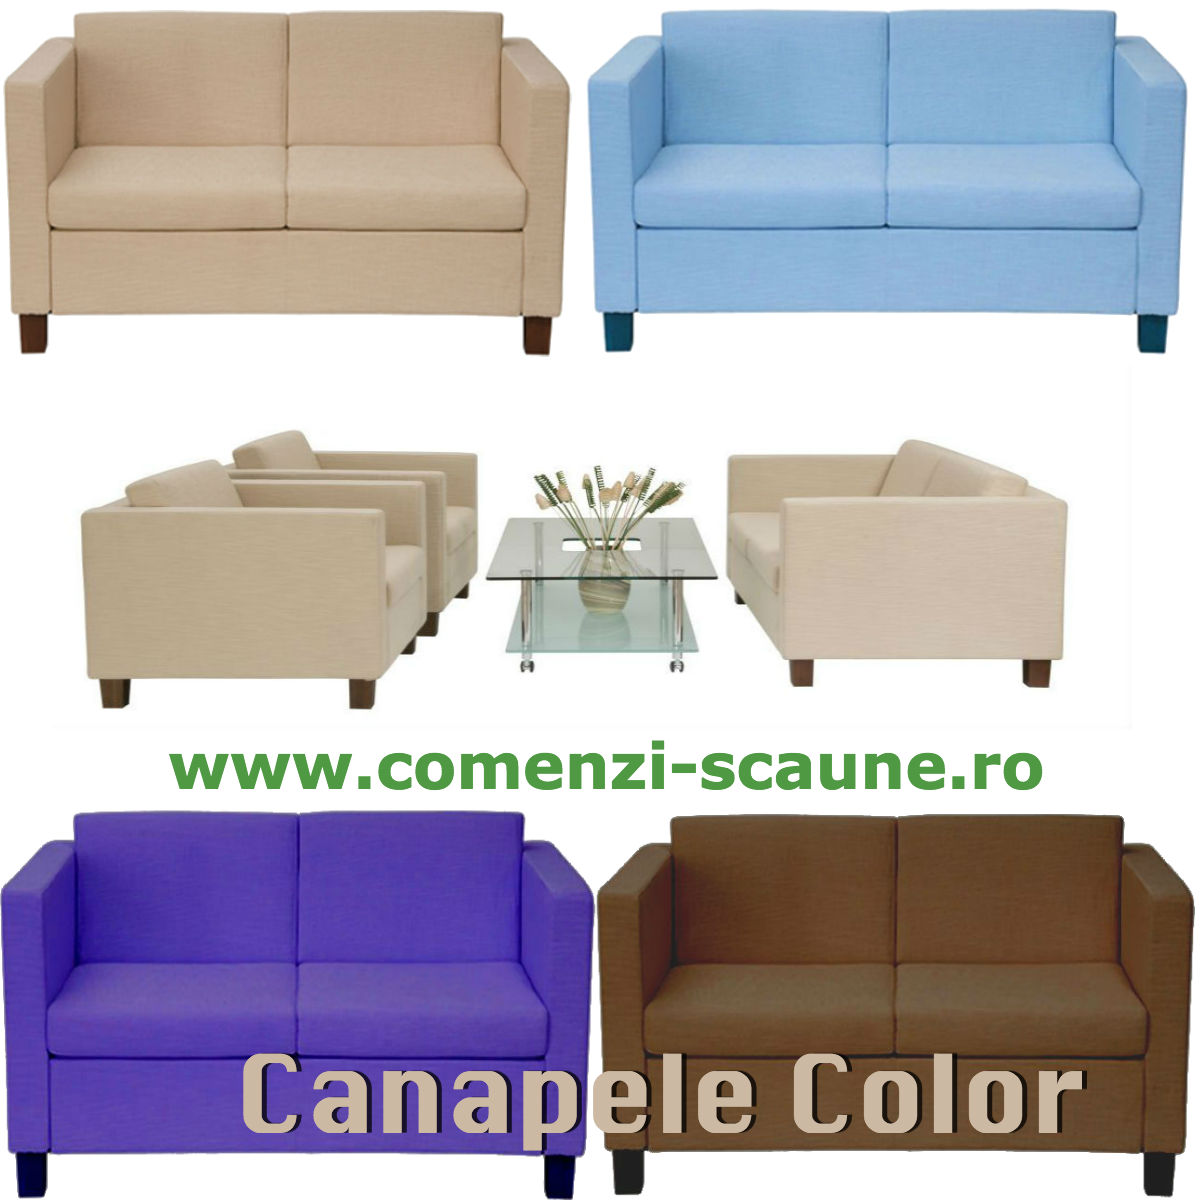 Canapele-color-office